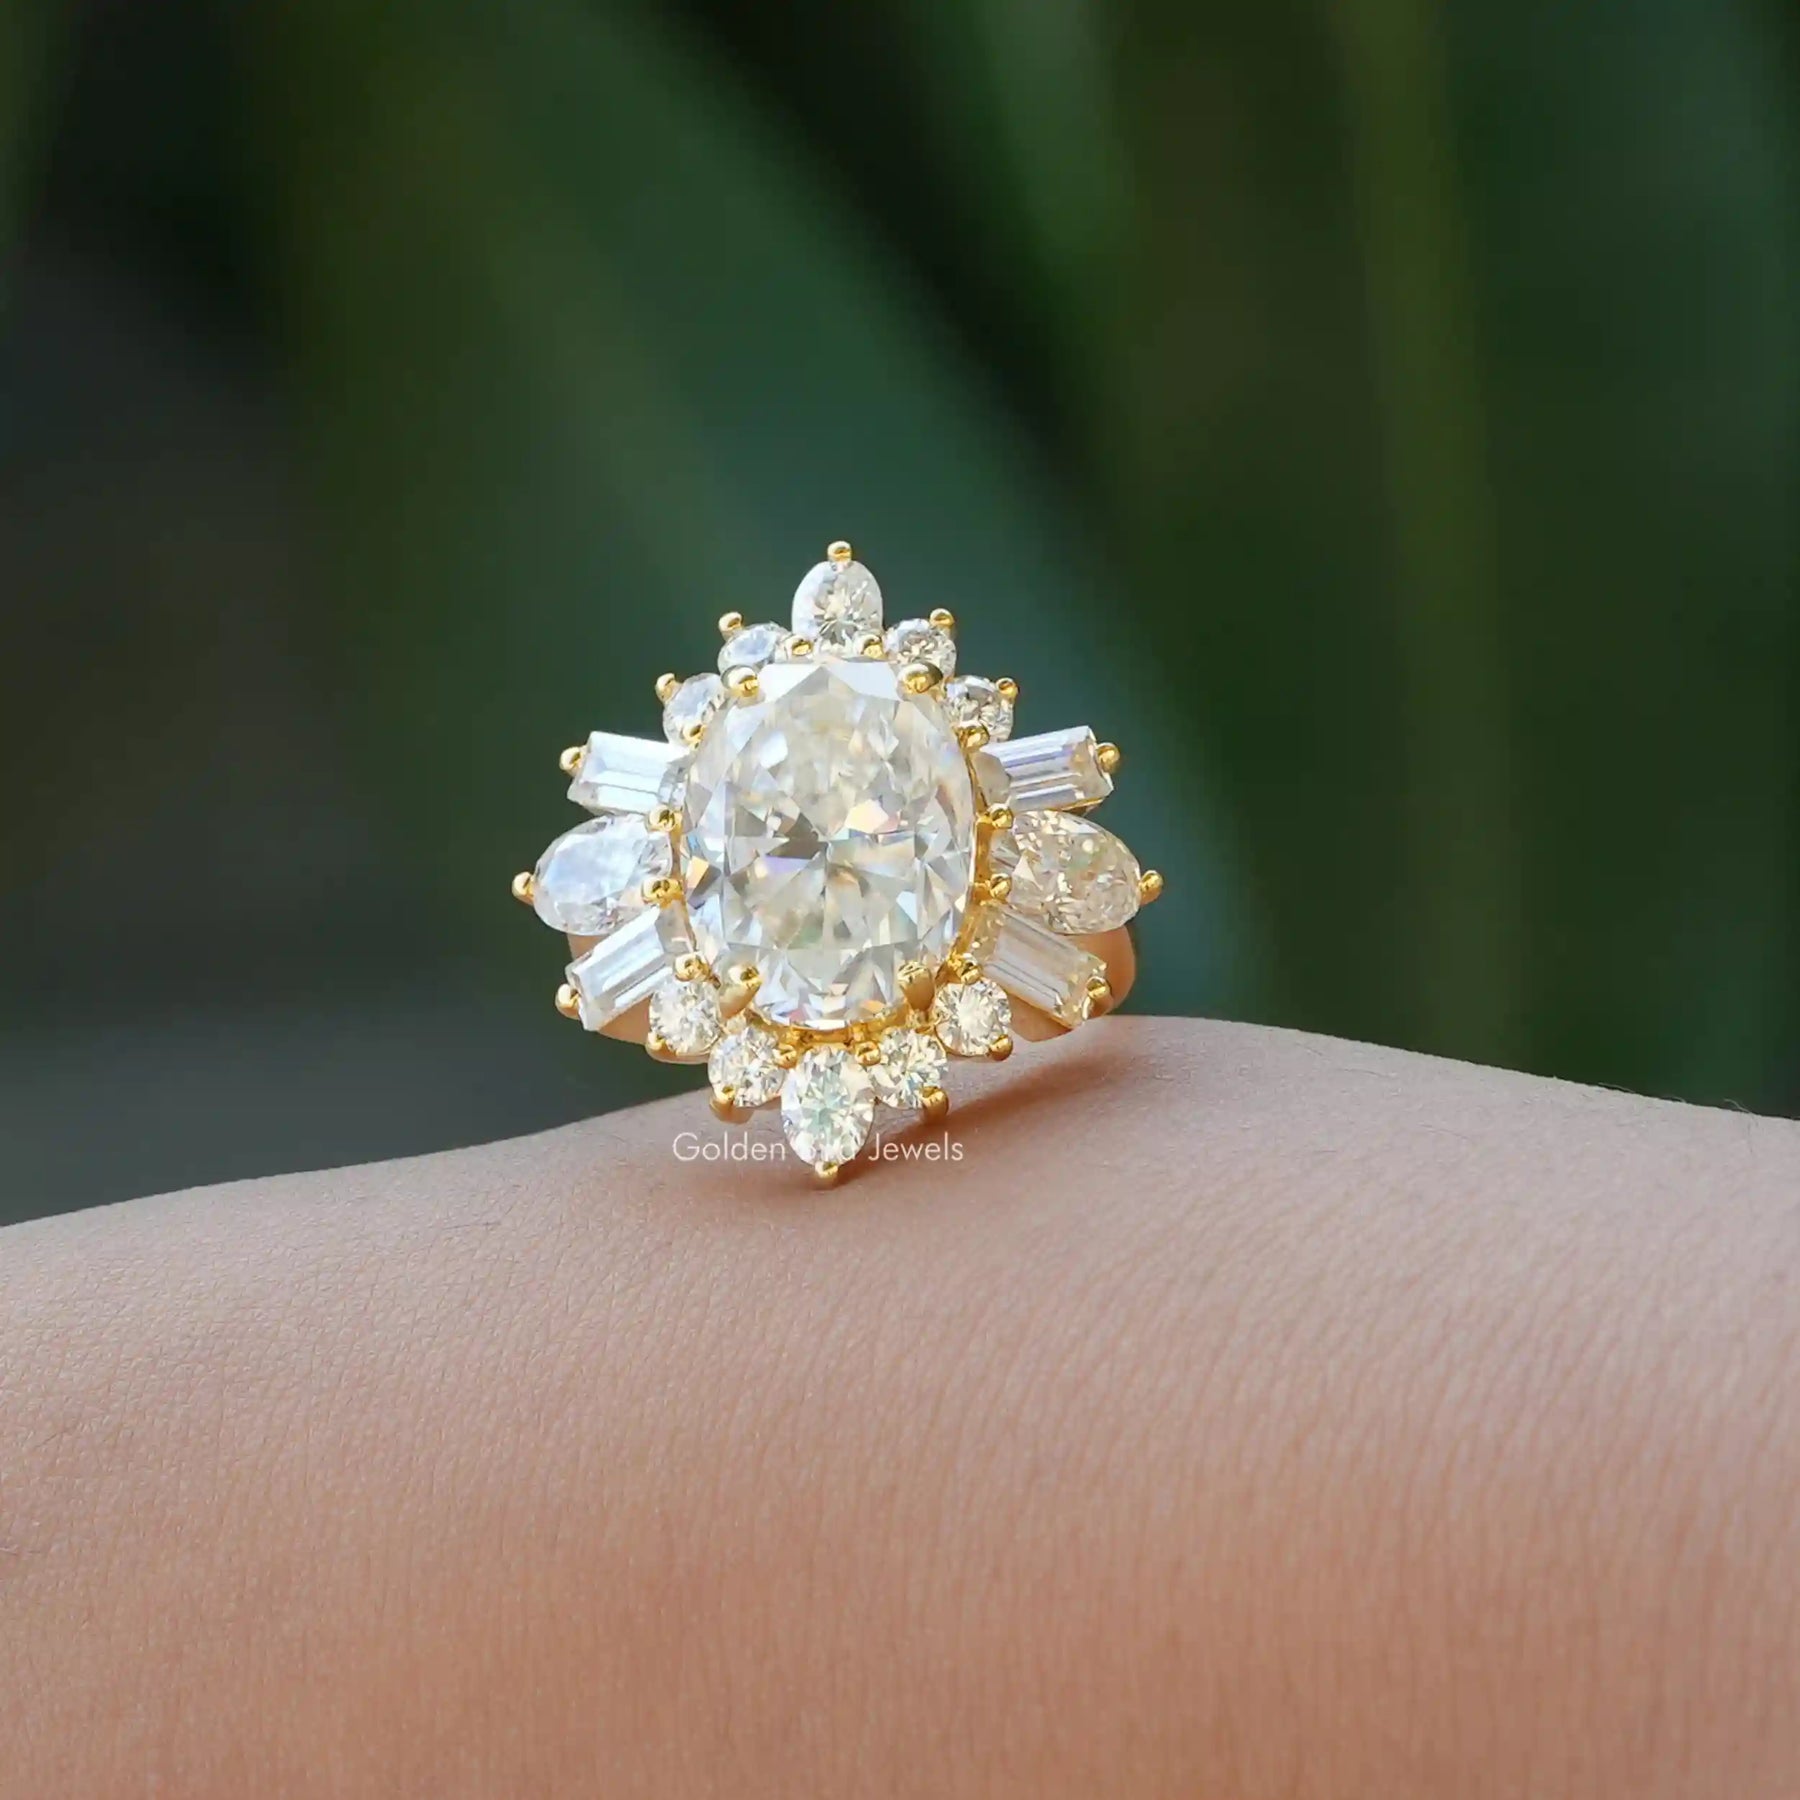 [This oval cut moissanite ring crafted with halo setting]-[Golden Bird Jewels]